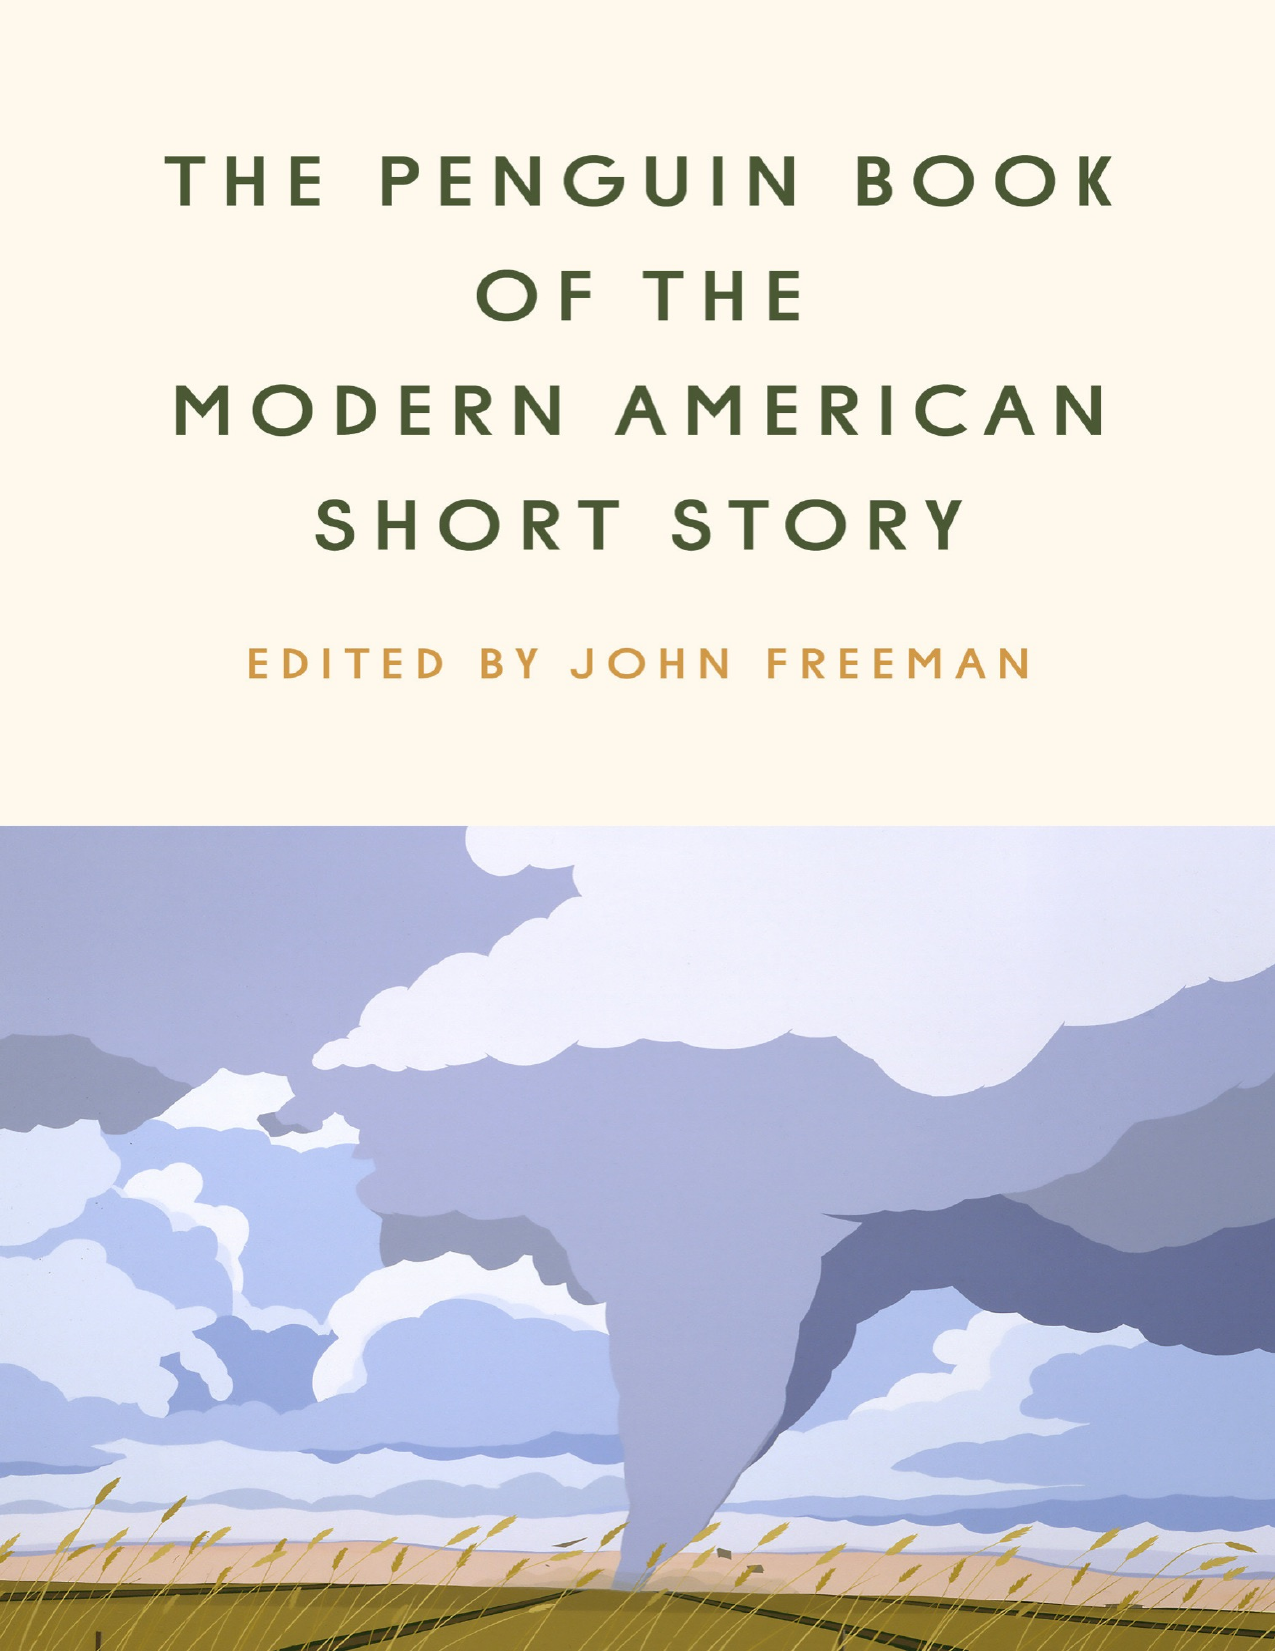 the-penguin-book-of-the-modern-american-short-story-1nbsped-1984877801-9781984877802  compress